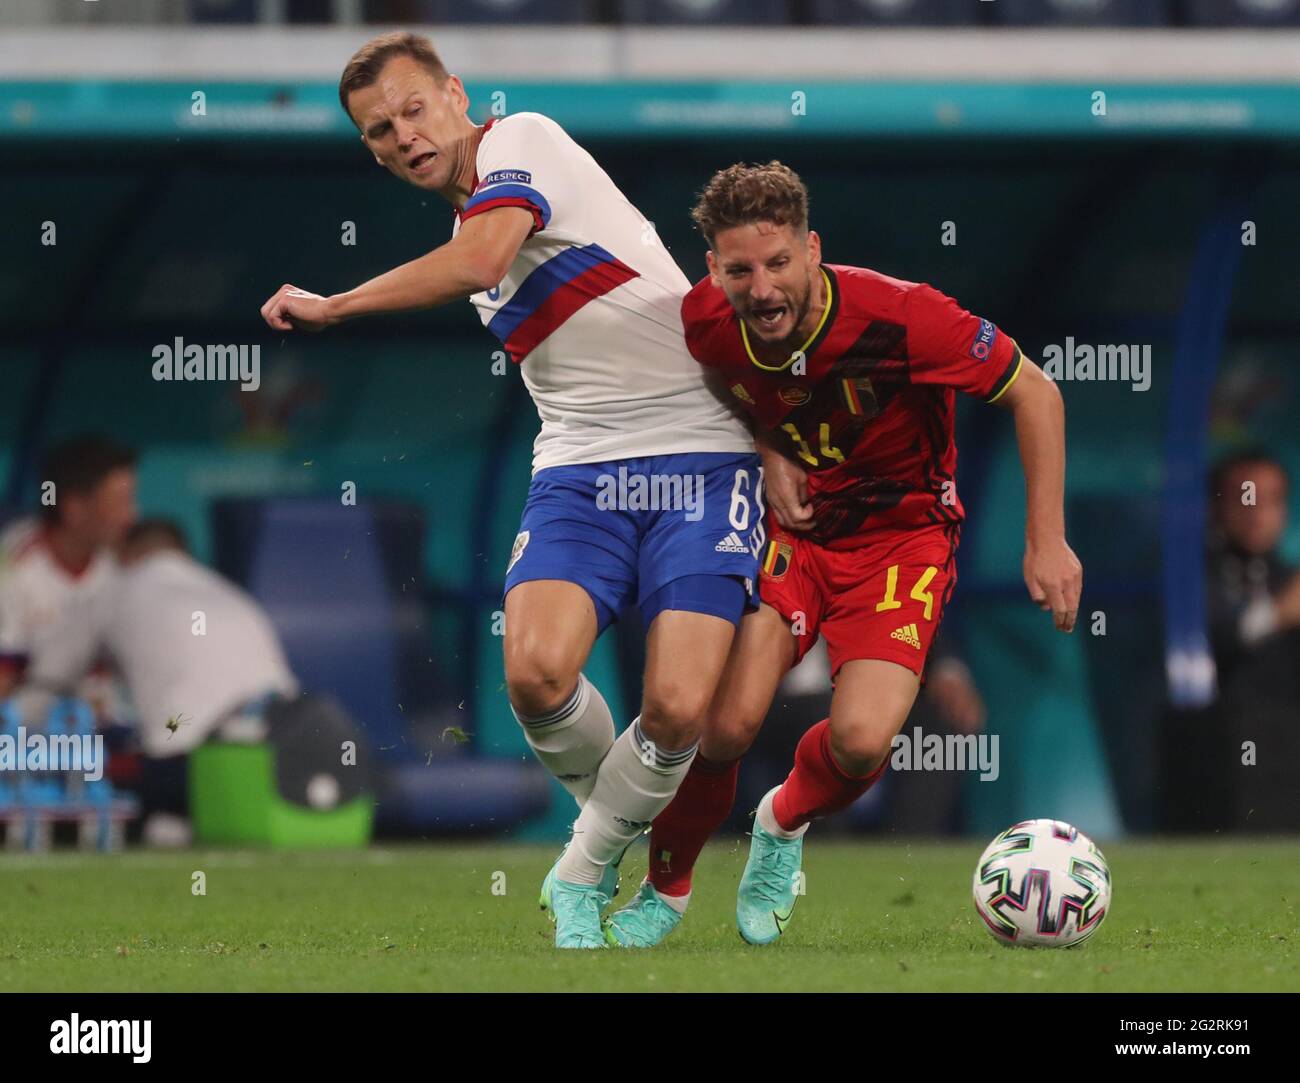 12 June 2021, Russia, St. Petersburg: Football: European Championship, Belgium - Russia, preliminary round, Group B, matchday 1 at St. Petersburg Stadium. Denis Cheryshev (Russia) and Dries Mertens (Belgium, r) in action. Important: For editorial news reporting purposes only. Not used for commercial or marketing purposes without prior written approval of UEFA. Images must appear as still images and must not emulate match action video footage. Photographs published in online publications (whether via the Internet or otherwise) shall have an interval of at least 20 seconds between the posting. P Stock Photo